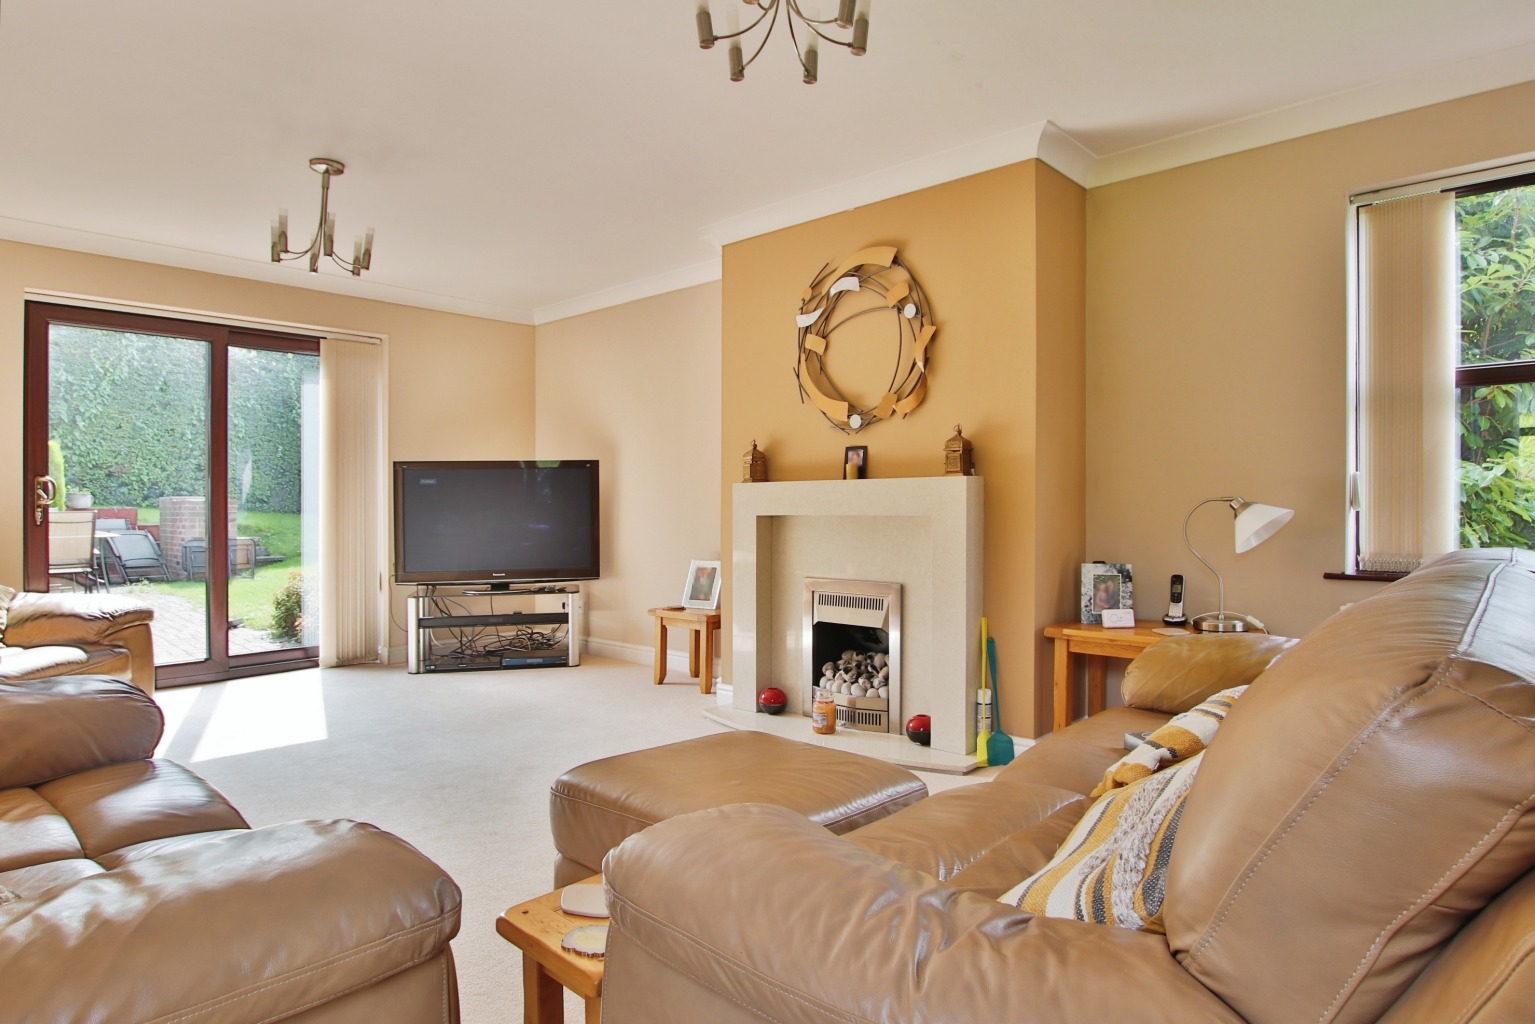 4 bed detached house for sale in Caistor Road, Barton upon Humber  - Property Image 2